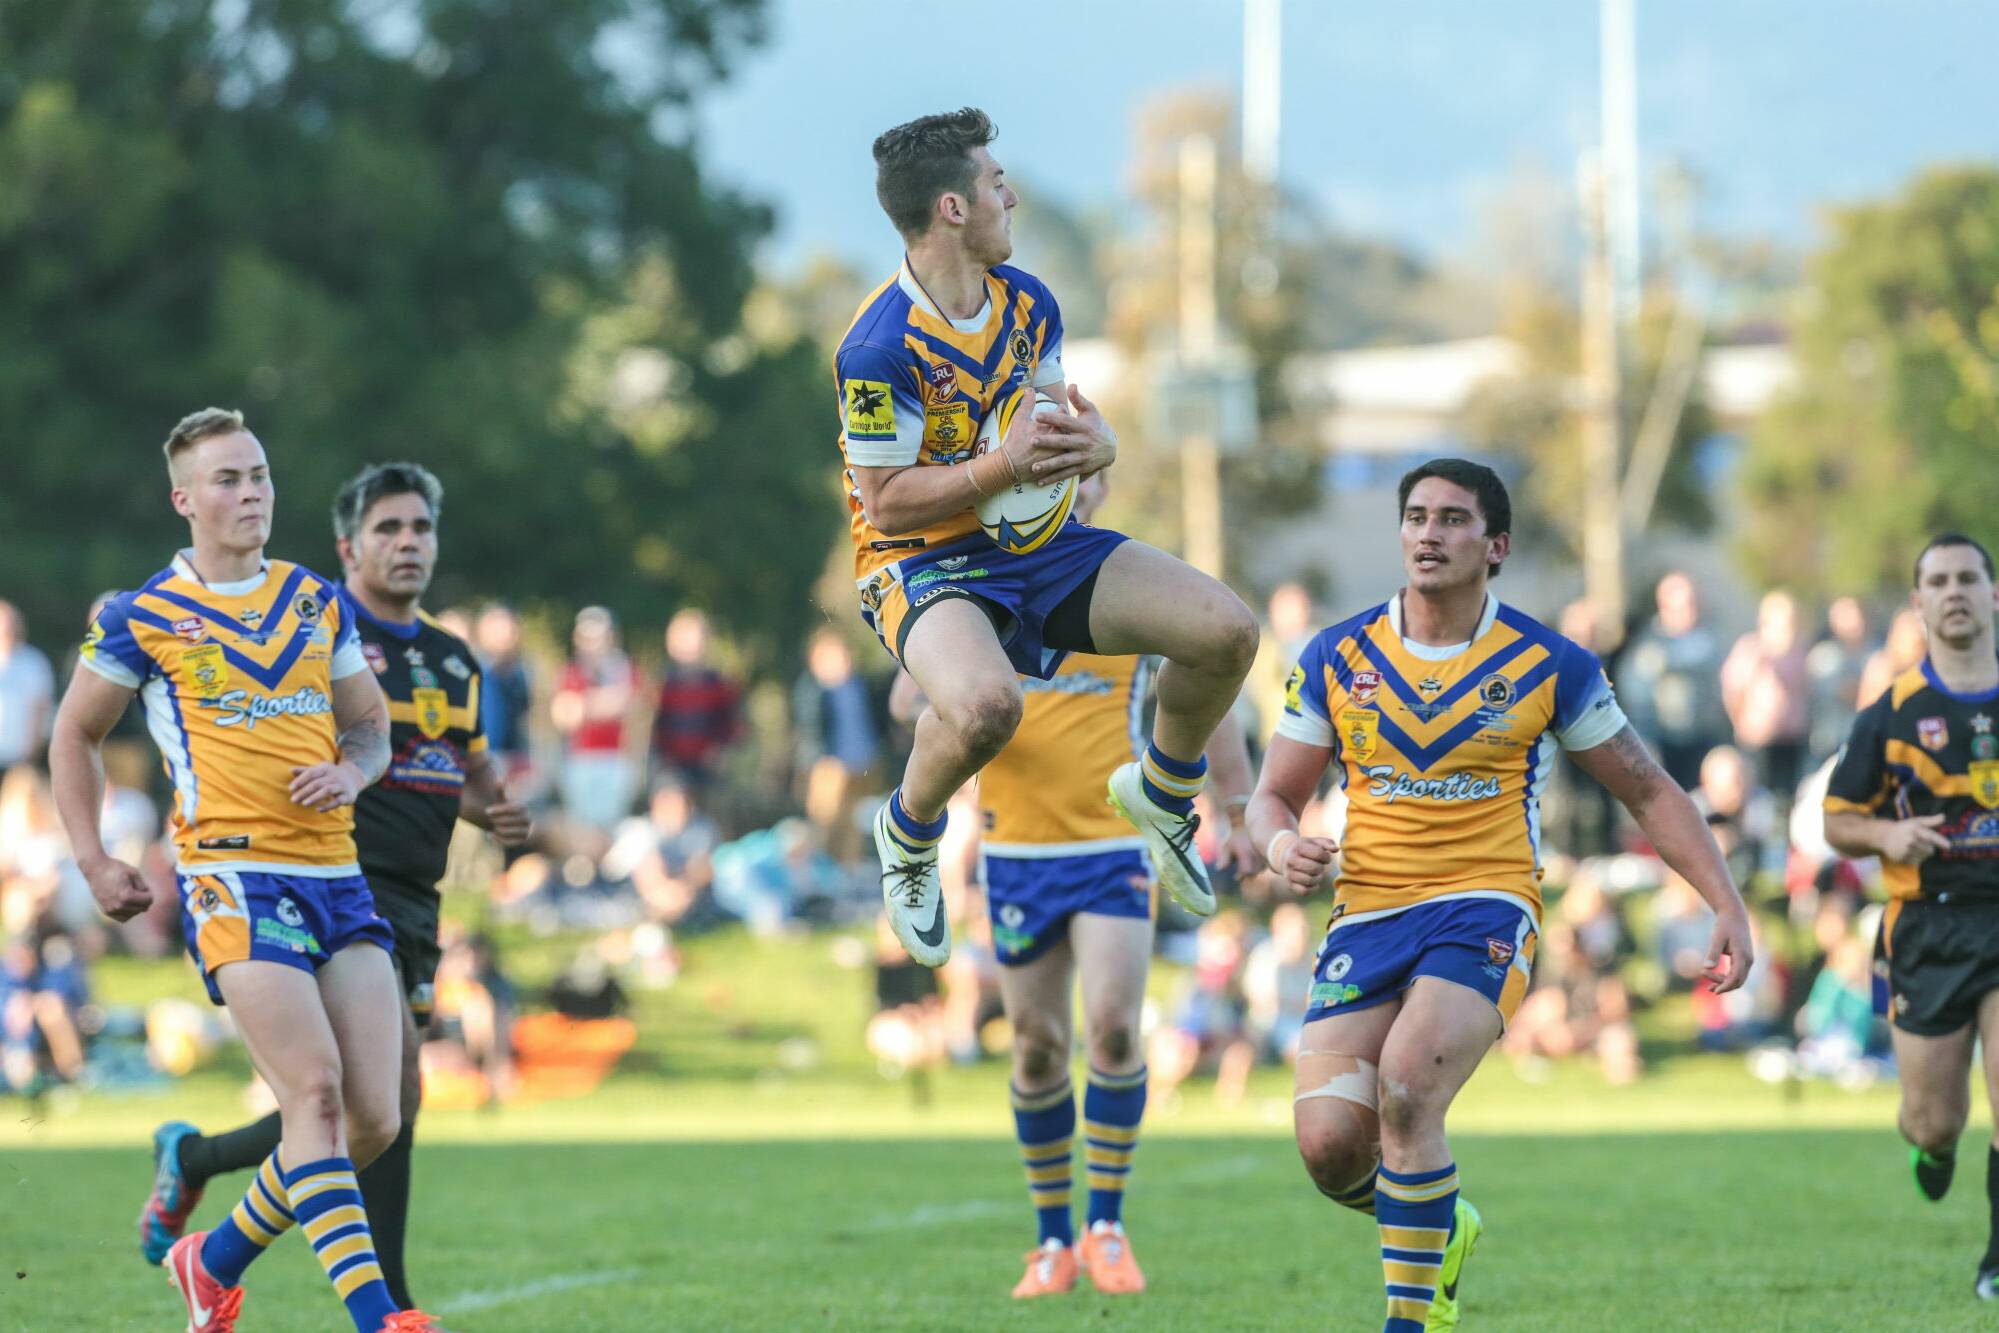 Nowra-Bomaderry Jets to host annual Indigenous round at Rugby Park, Illawarra Mercury